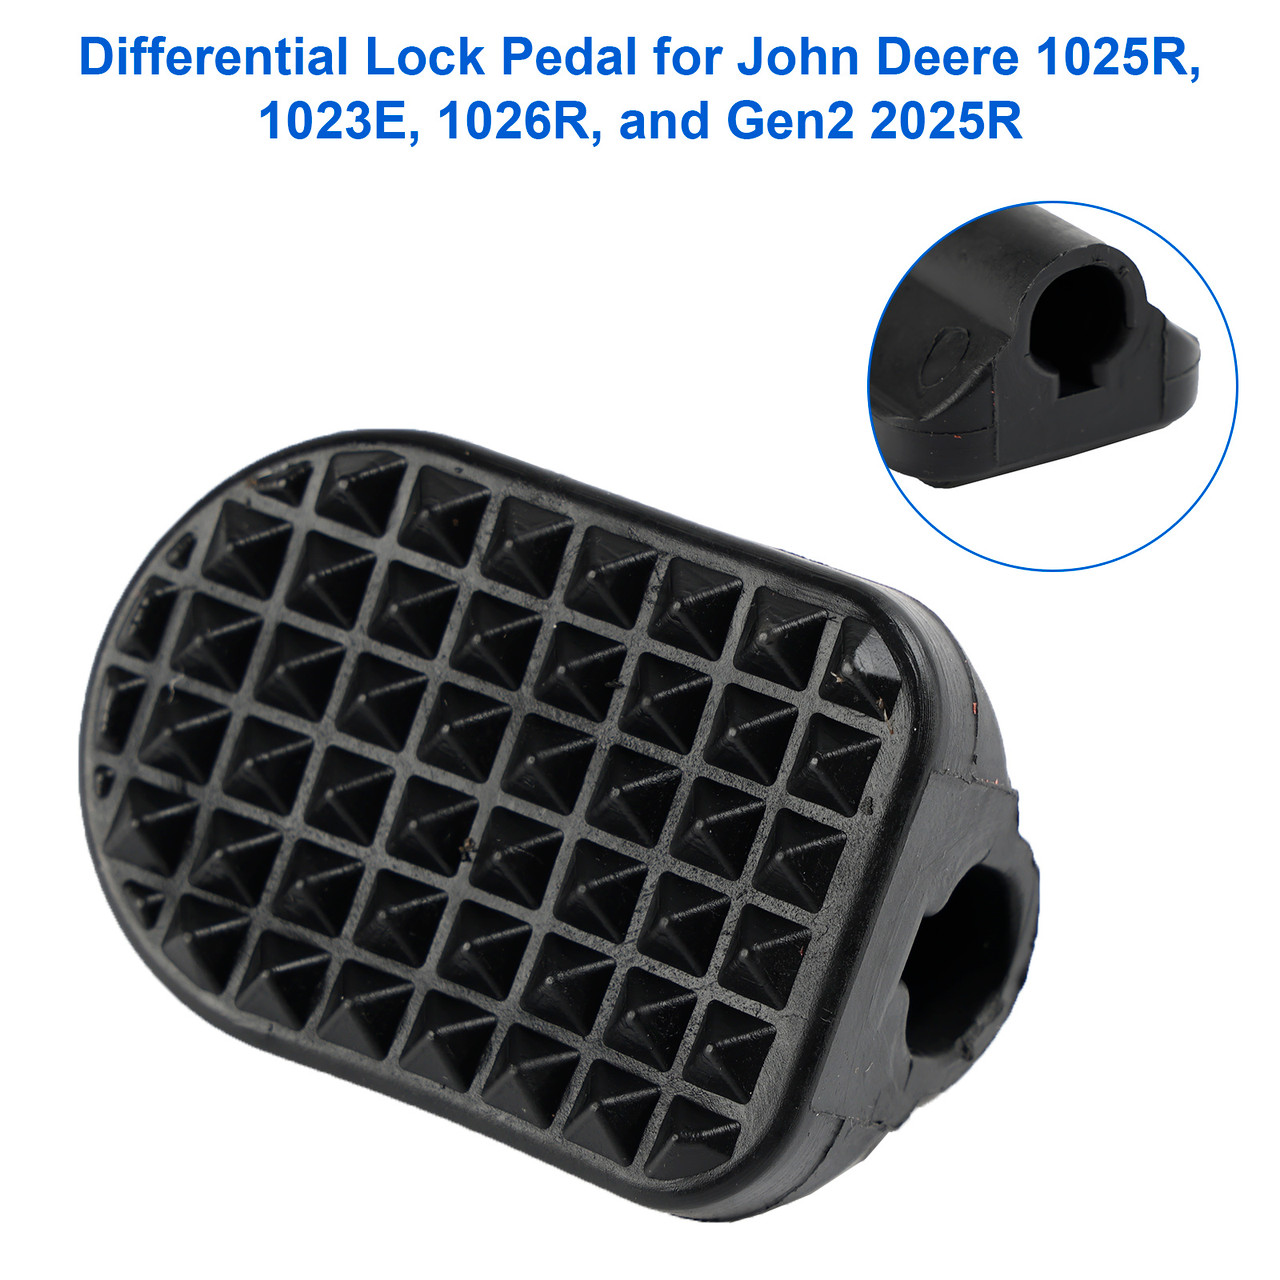 Differential Lock Pedal for John Deere 1025R, 1023E, 1026R, and Gen2 2025R